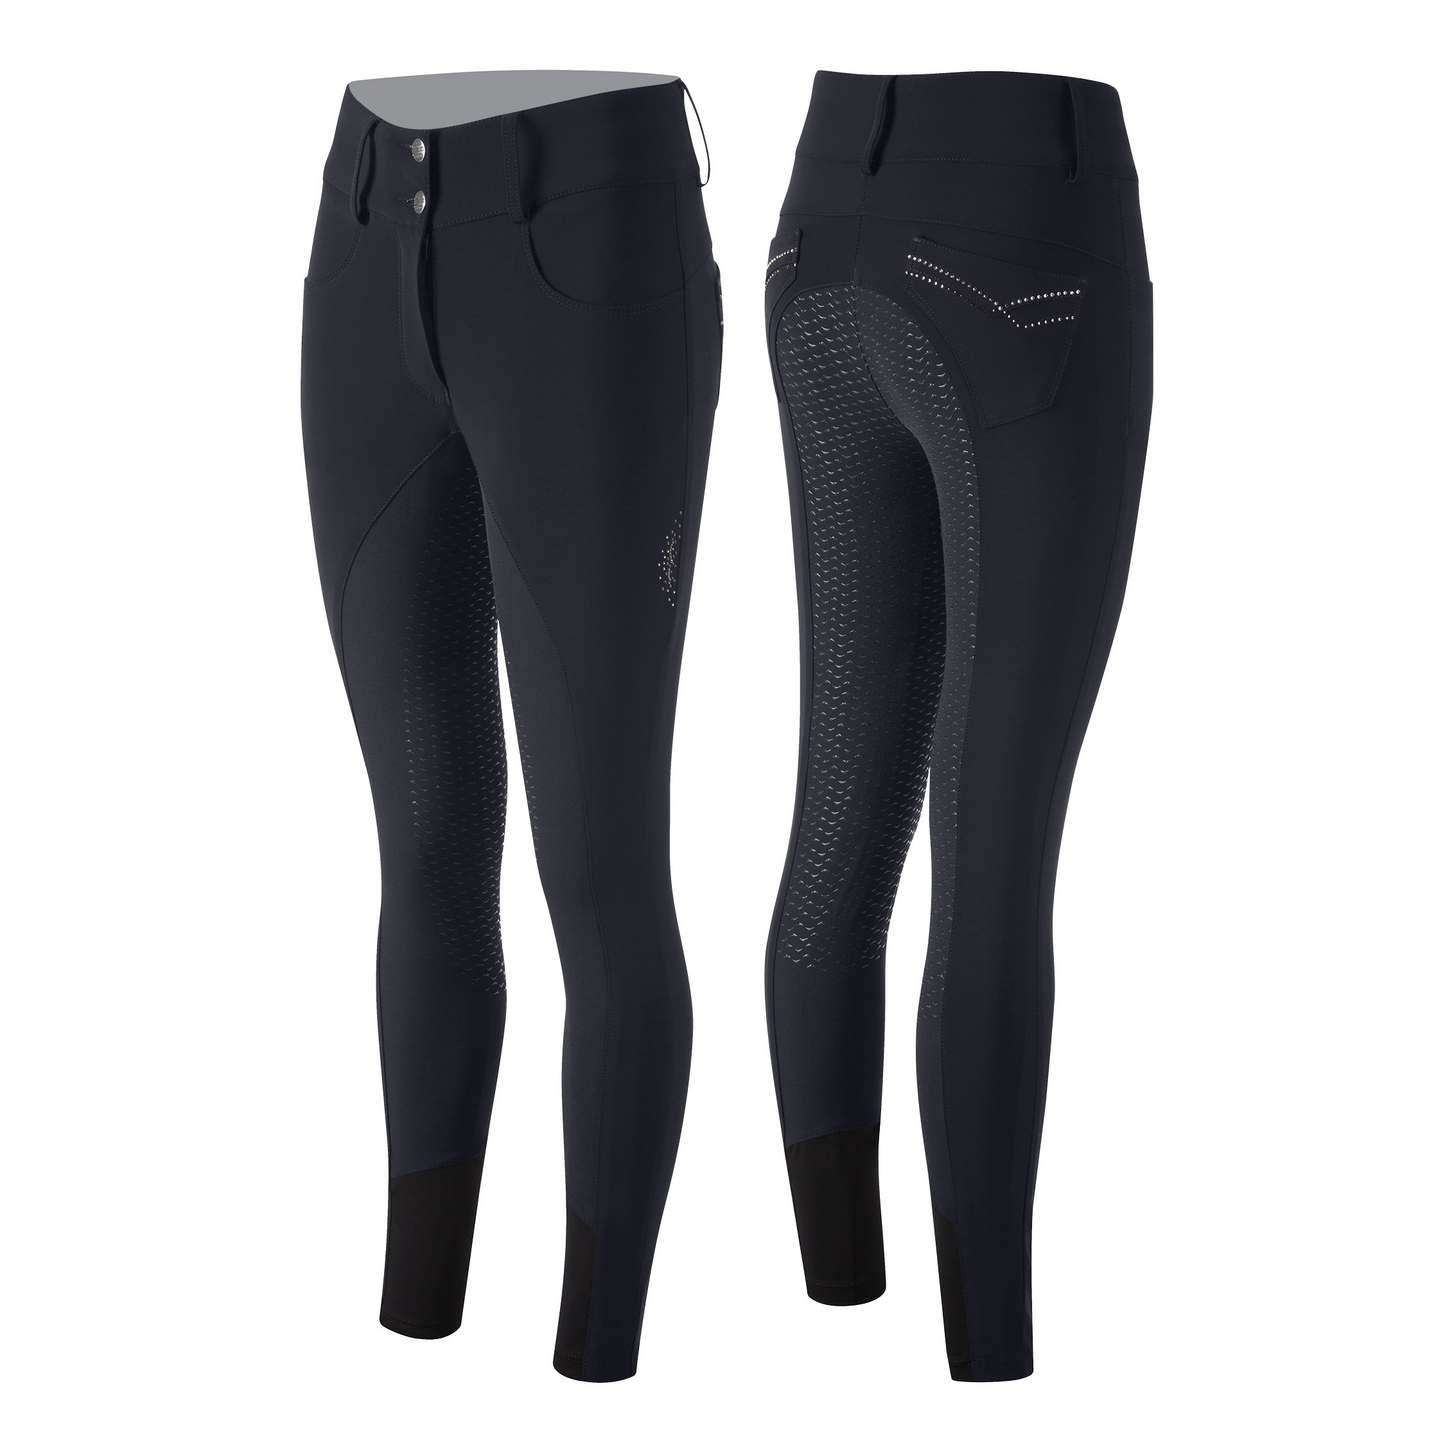 Animo brand women's riding breeches, black with grip detailing.